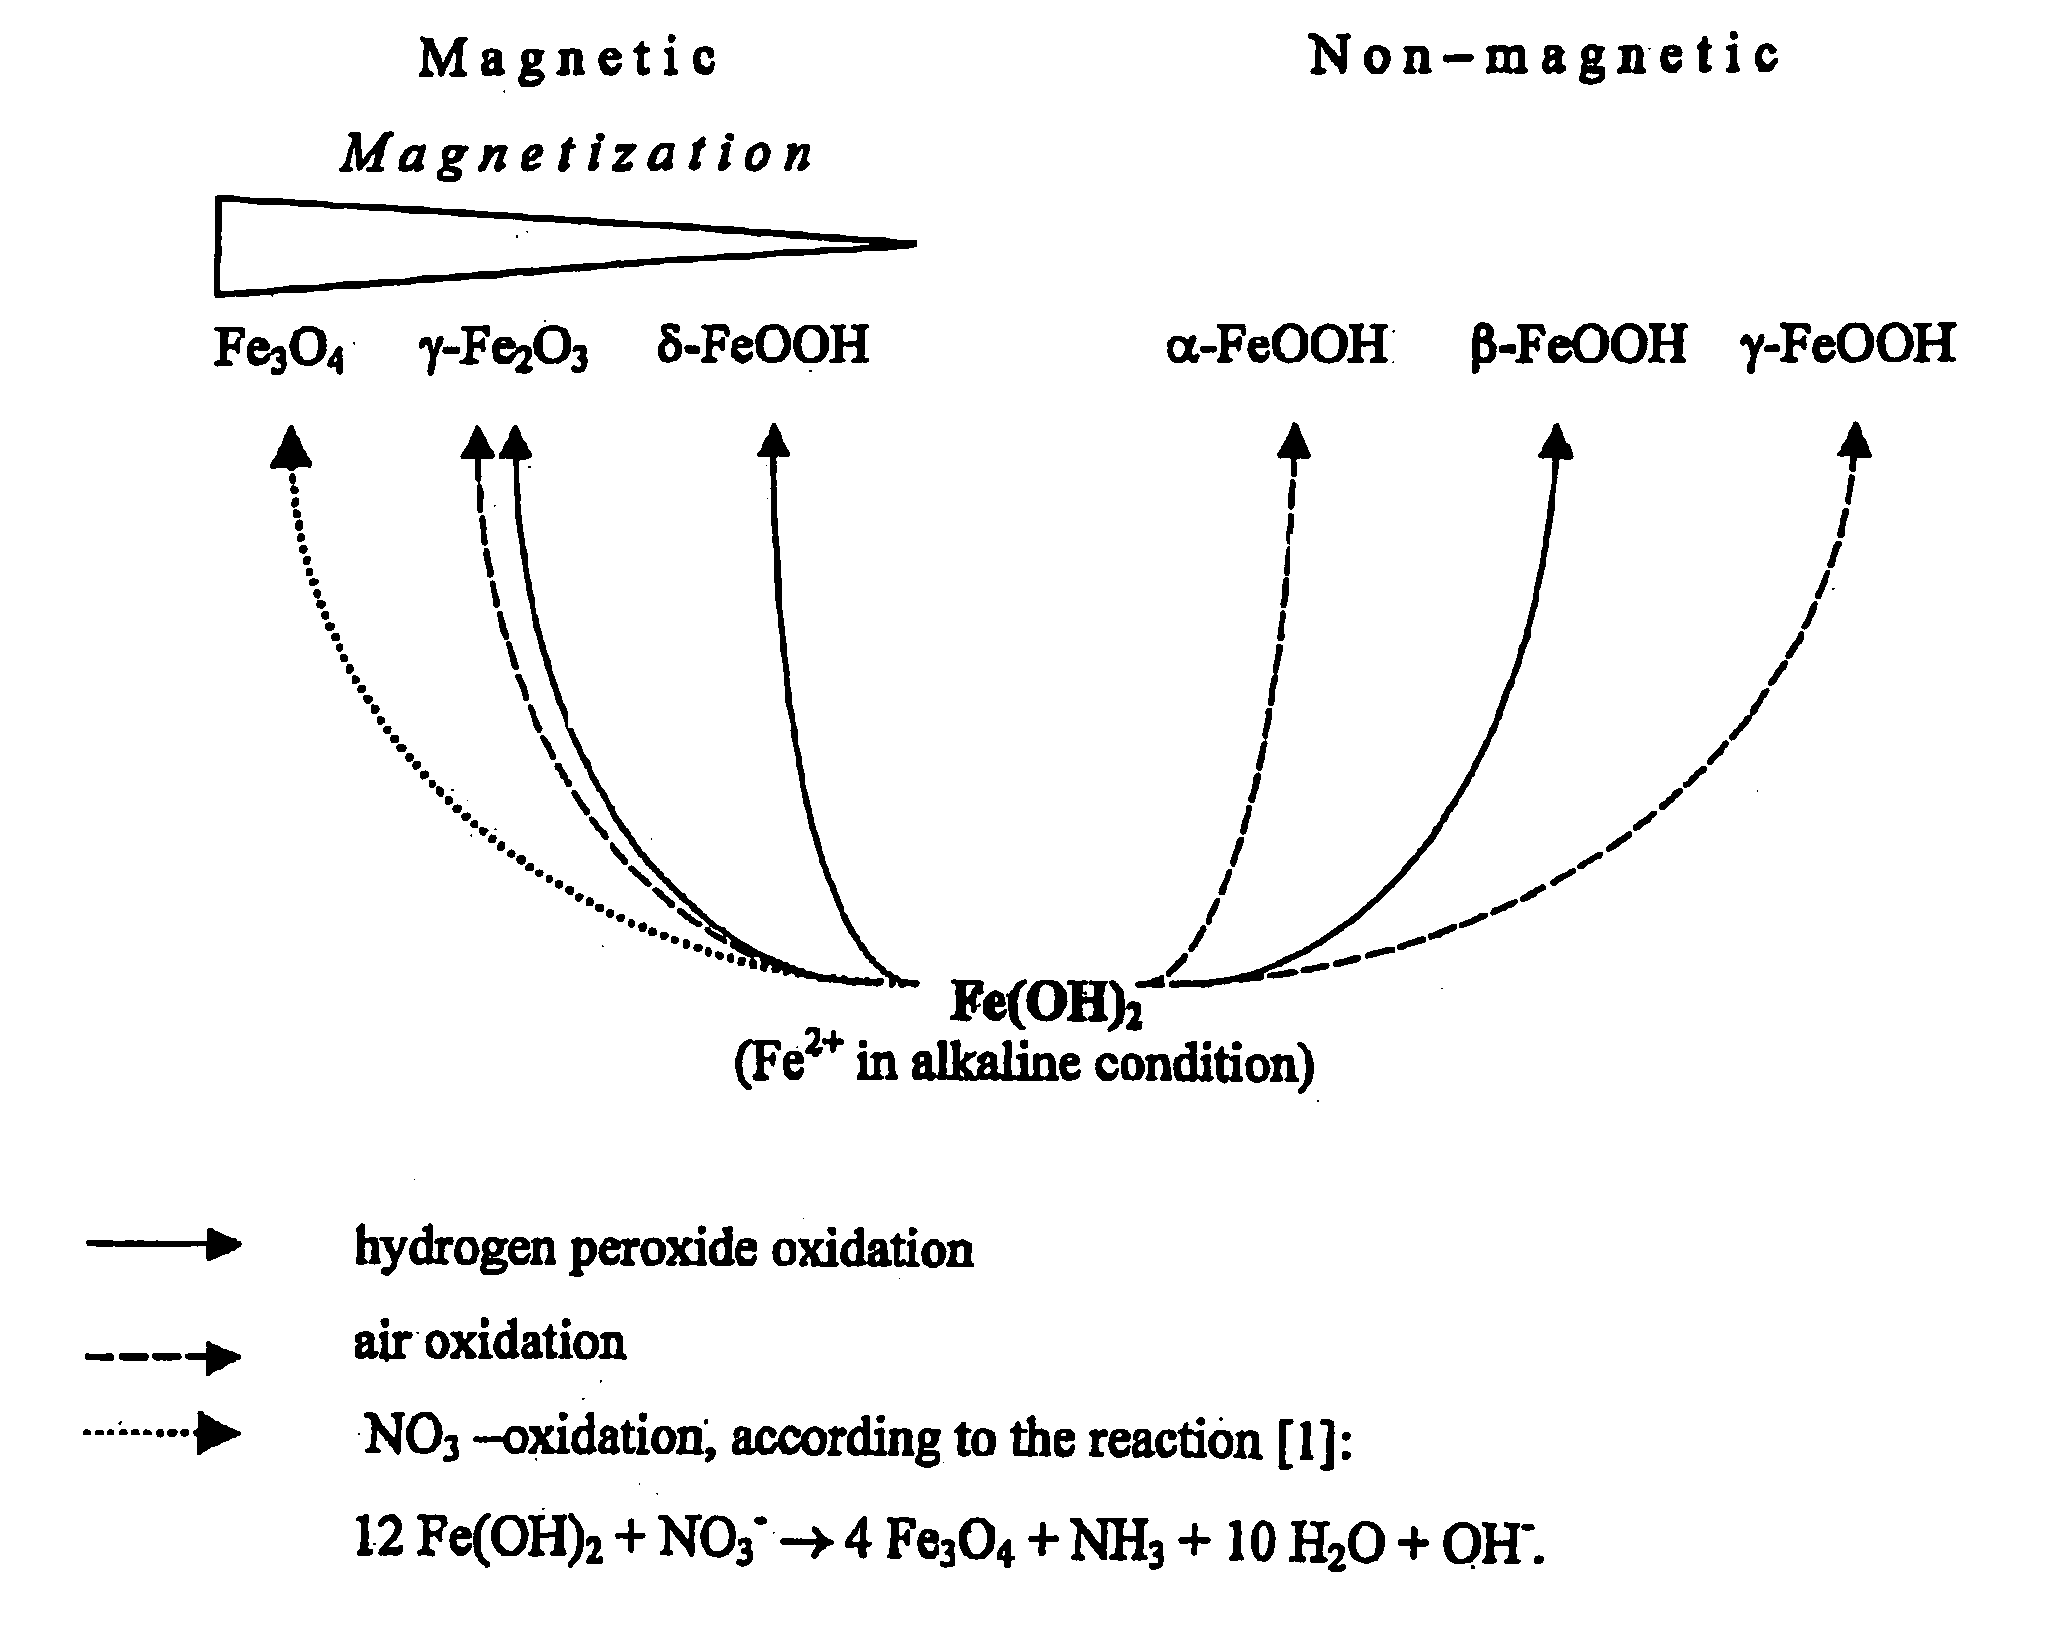 Formation of superparamagnetic particles